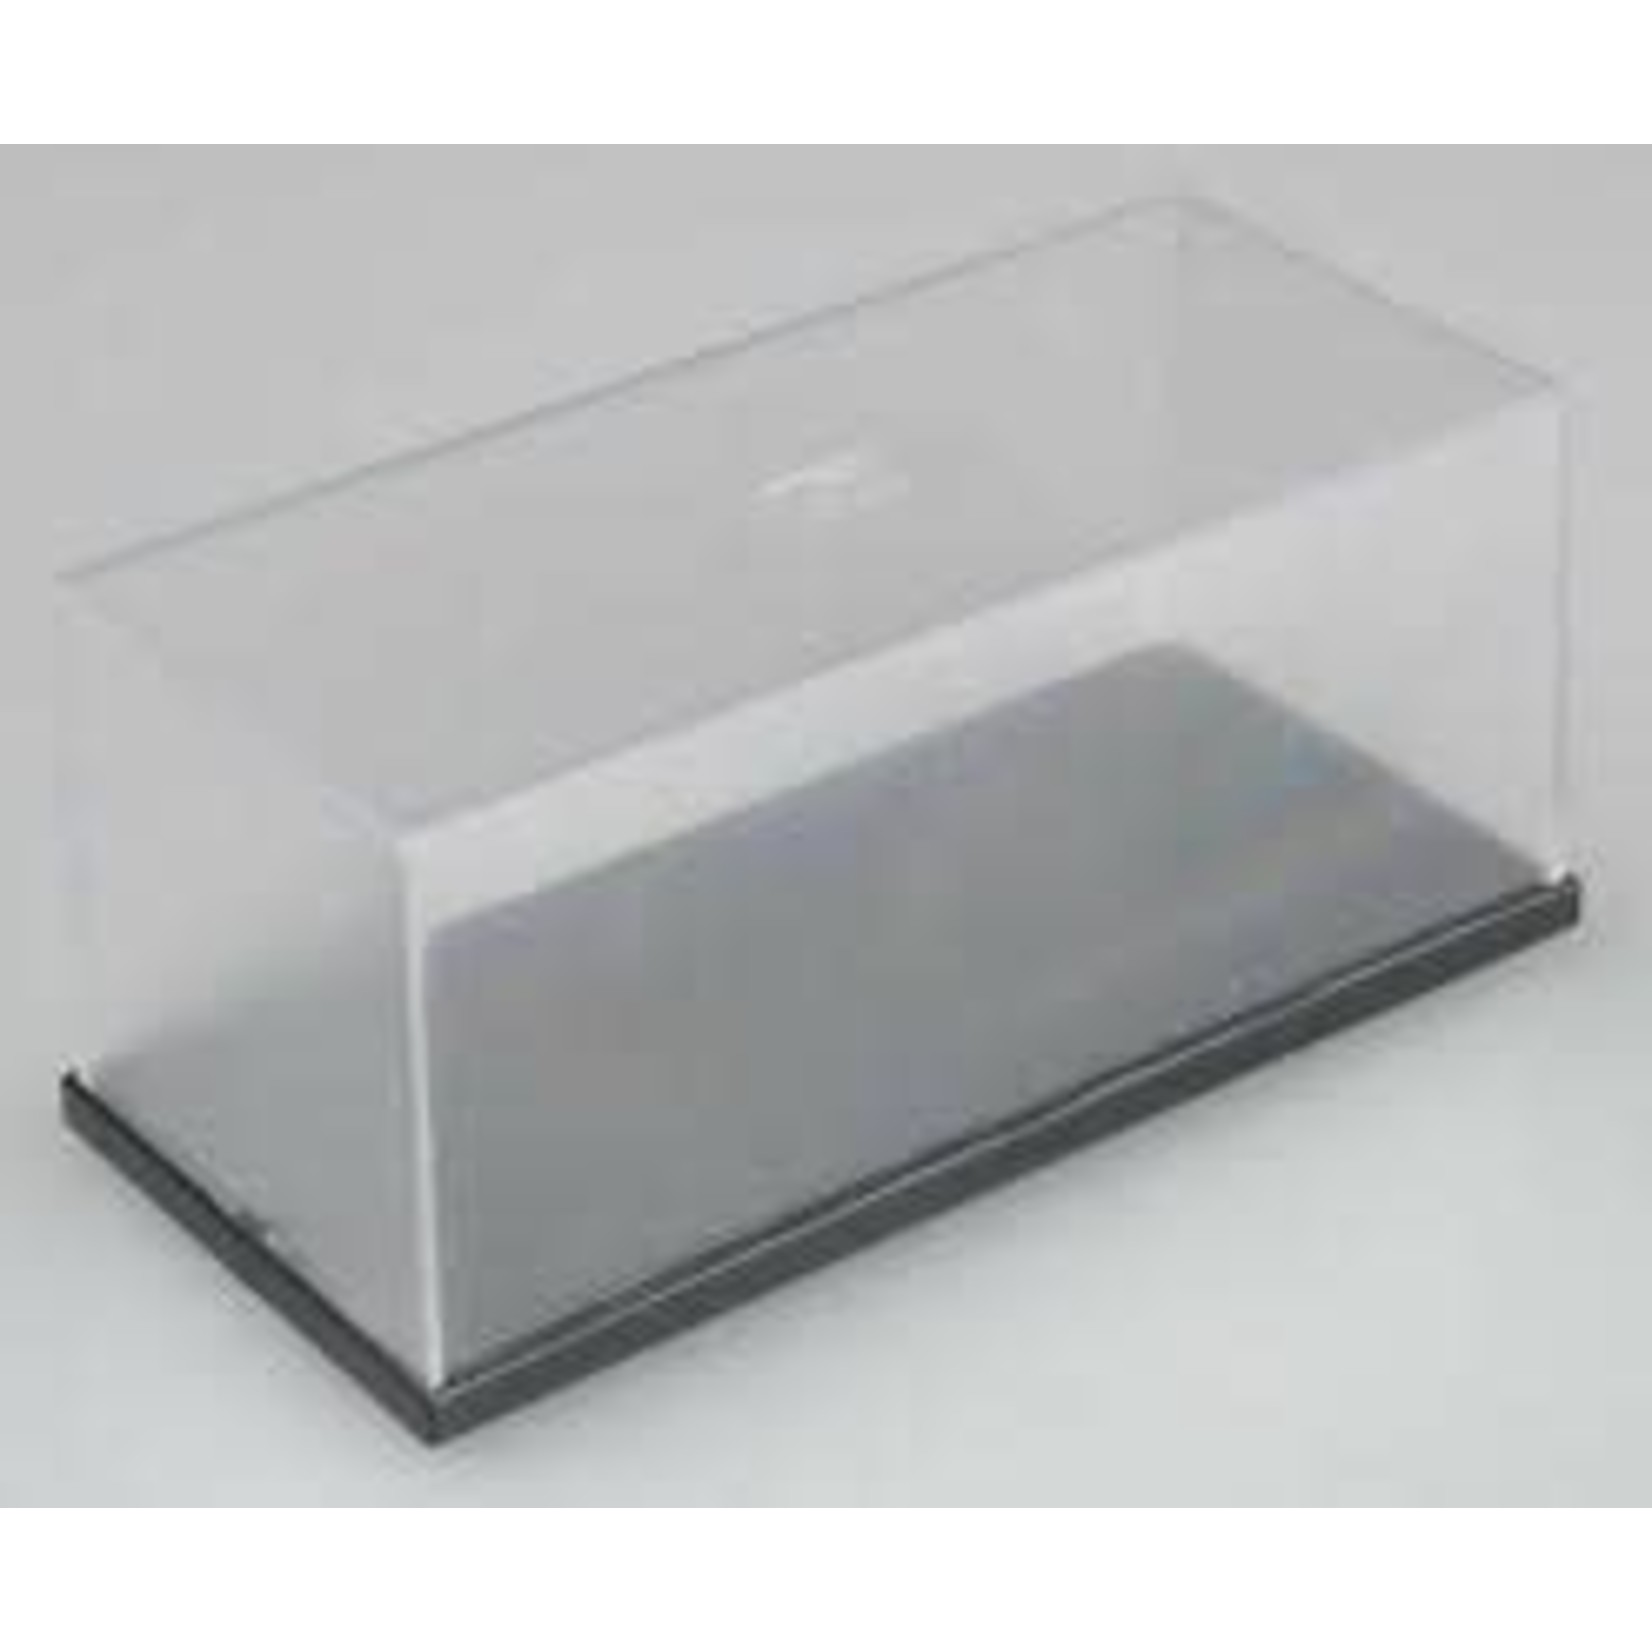 Trumpeter Display Case for 1/43 Autos, 1/